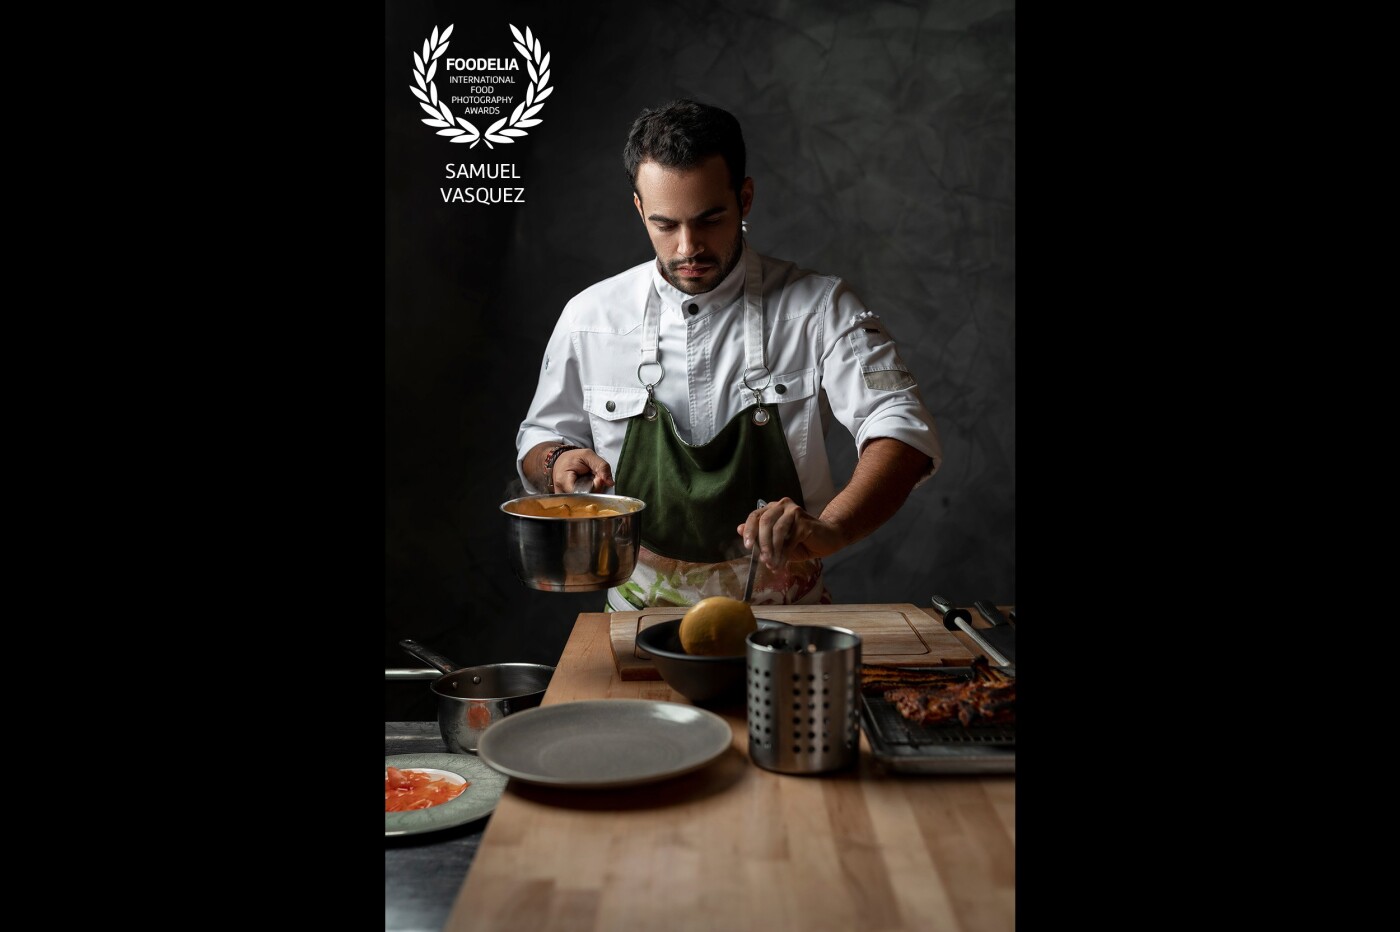 This is Chef Carlos Romero part of the new upcoming wave of promising chefs in the Dominican Republic. This image is featured in Santo Domingo Times Magazine as part of an article about the new generation of cuisine in the country and the faces behind it.